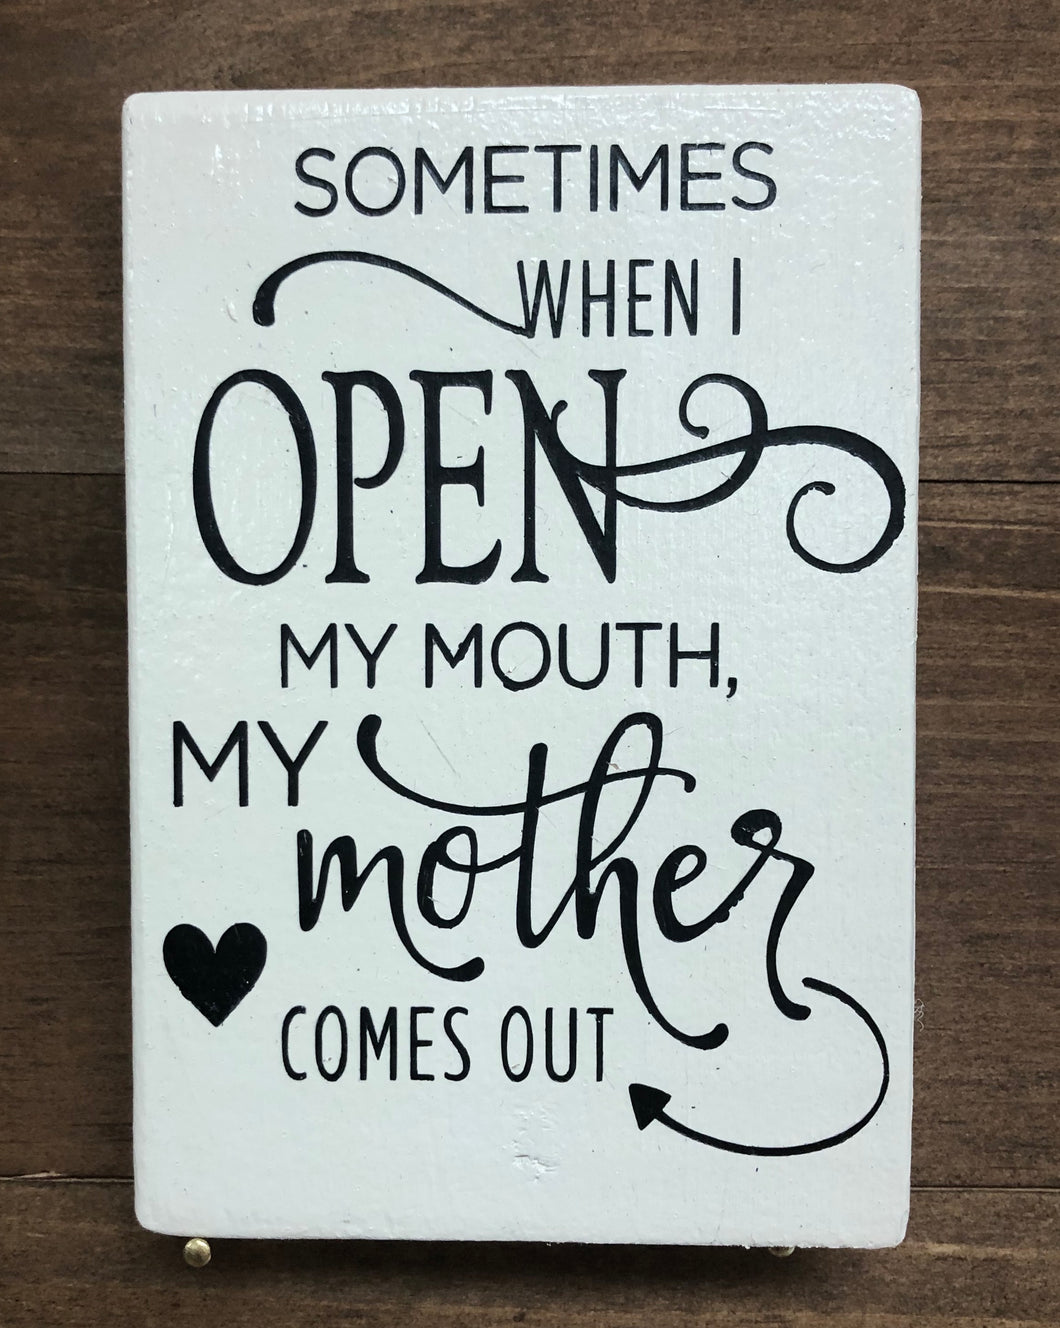 3x5 Open My Mouth Handmade Sign